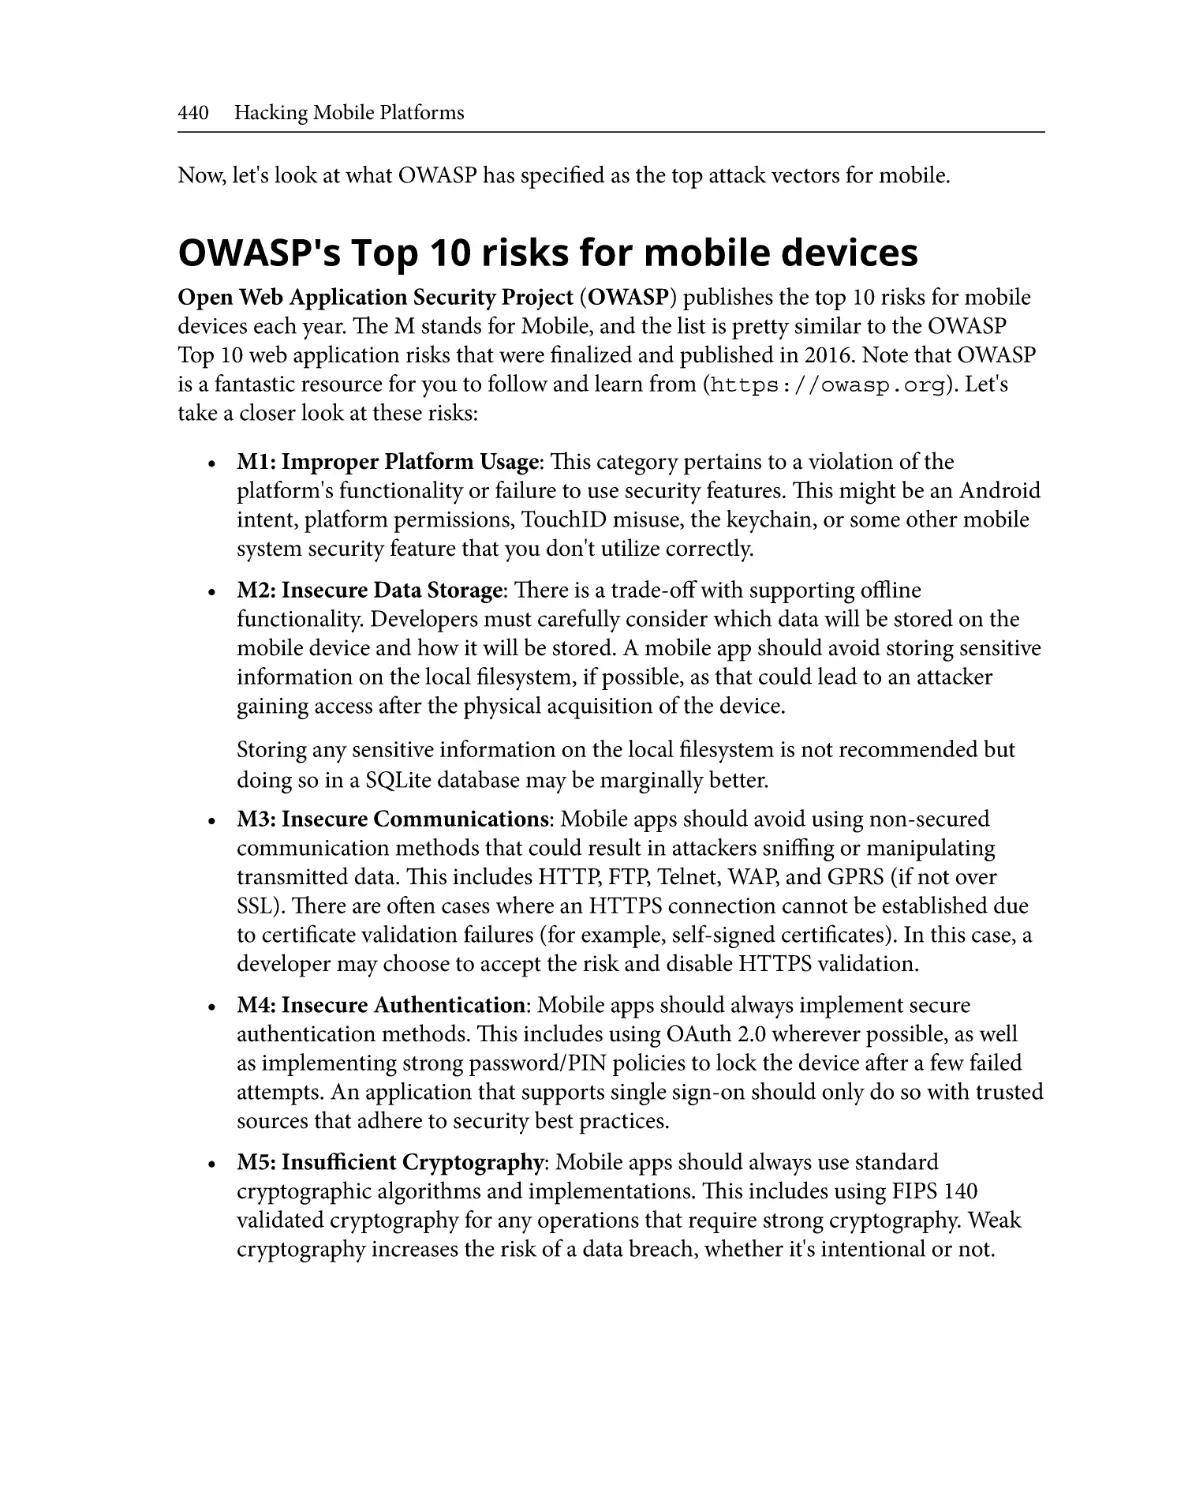 OWASP's Top 10 risks for mobile devices